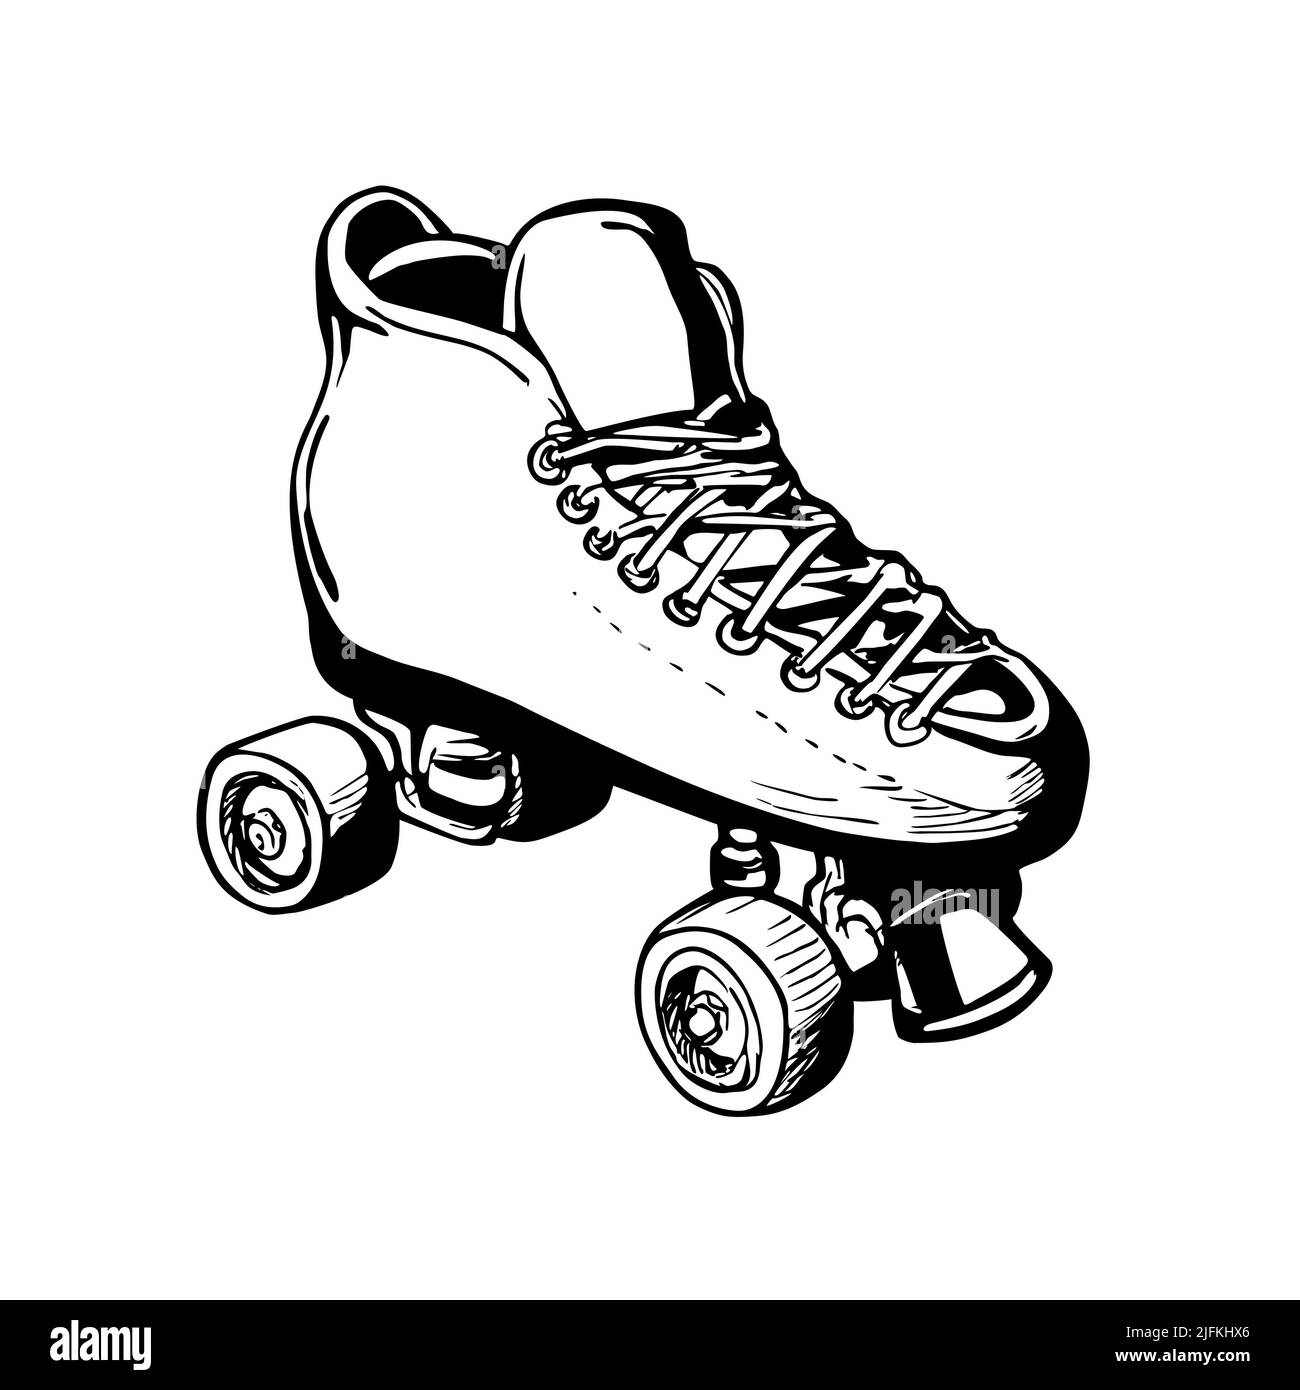 Roller derby Black and White Stock Photos & Images - Alamy